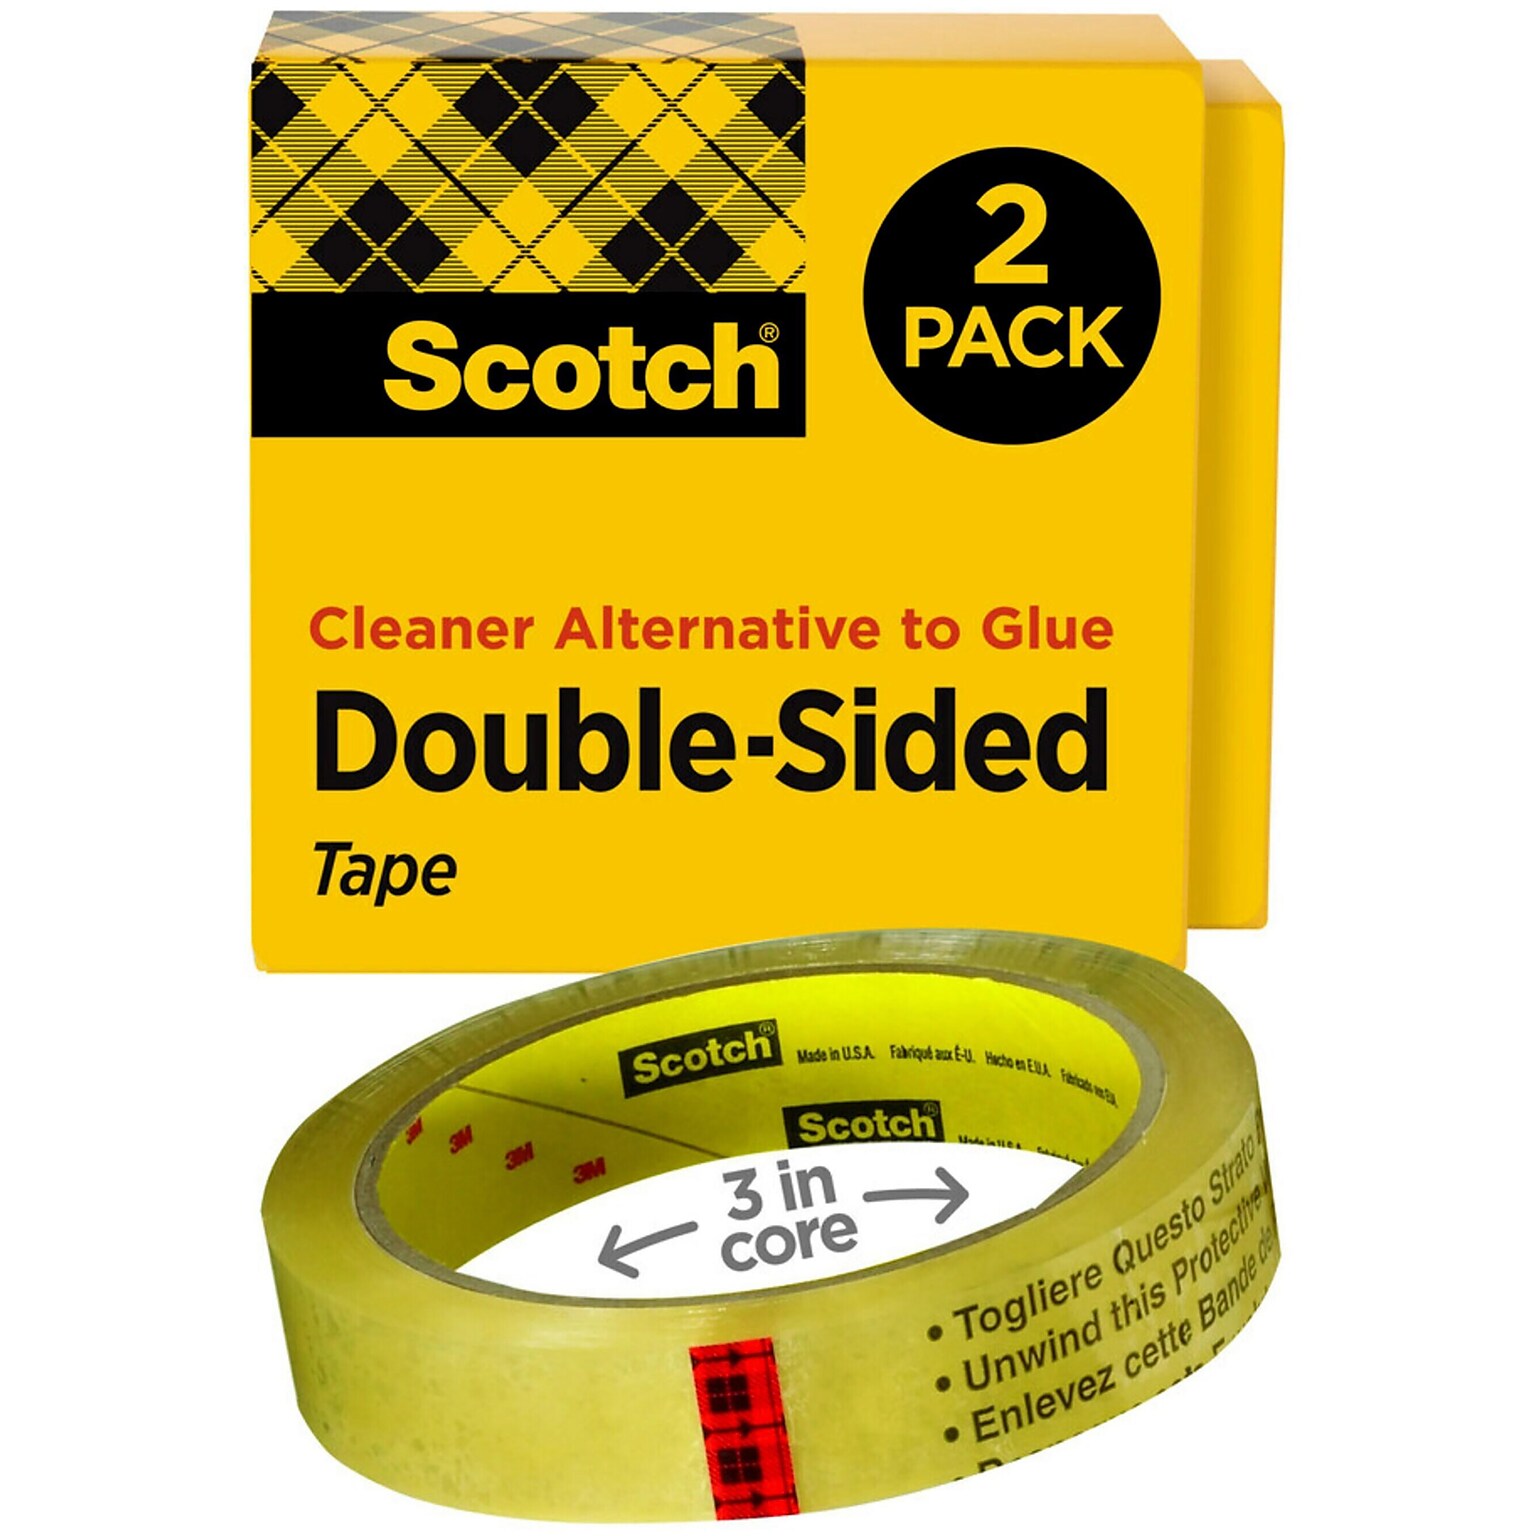 Scotch Permanent Double Sided Tape, 3/4 in x 1296 in, 2 Tape Rolls, Refill, Home Office and Back to School Supplies